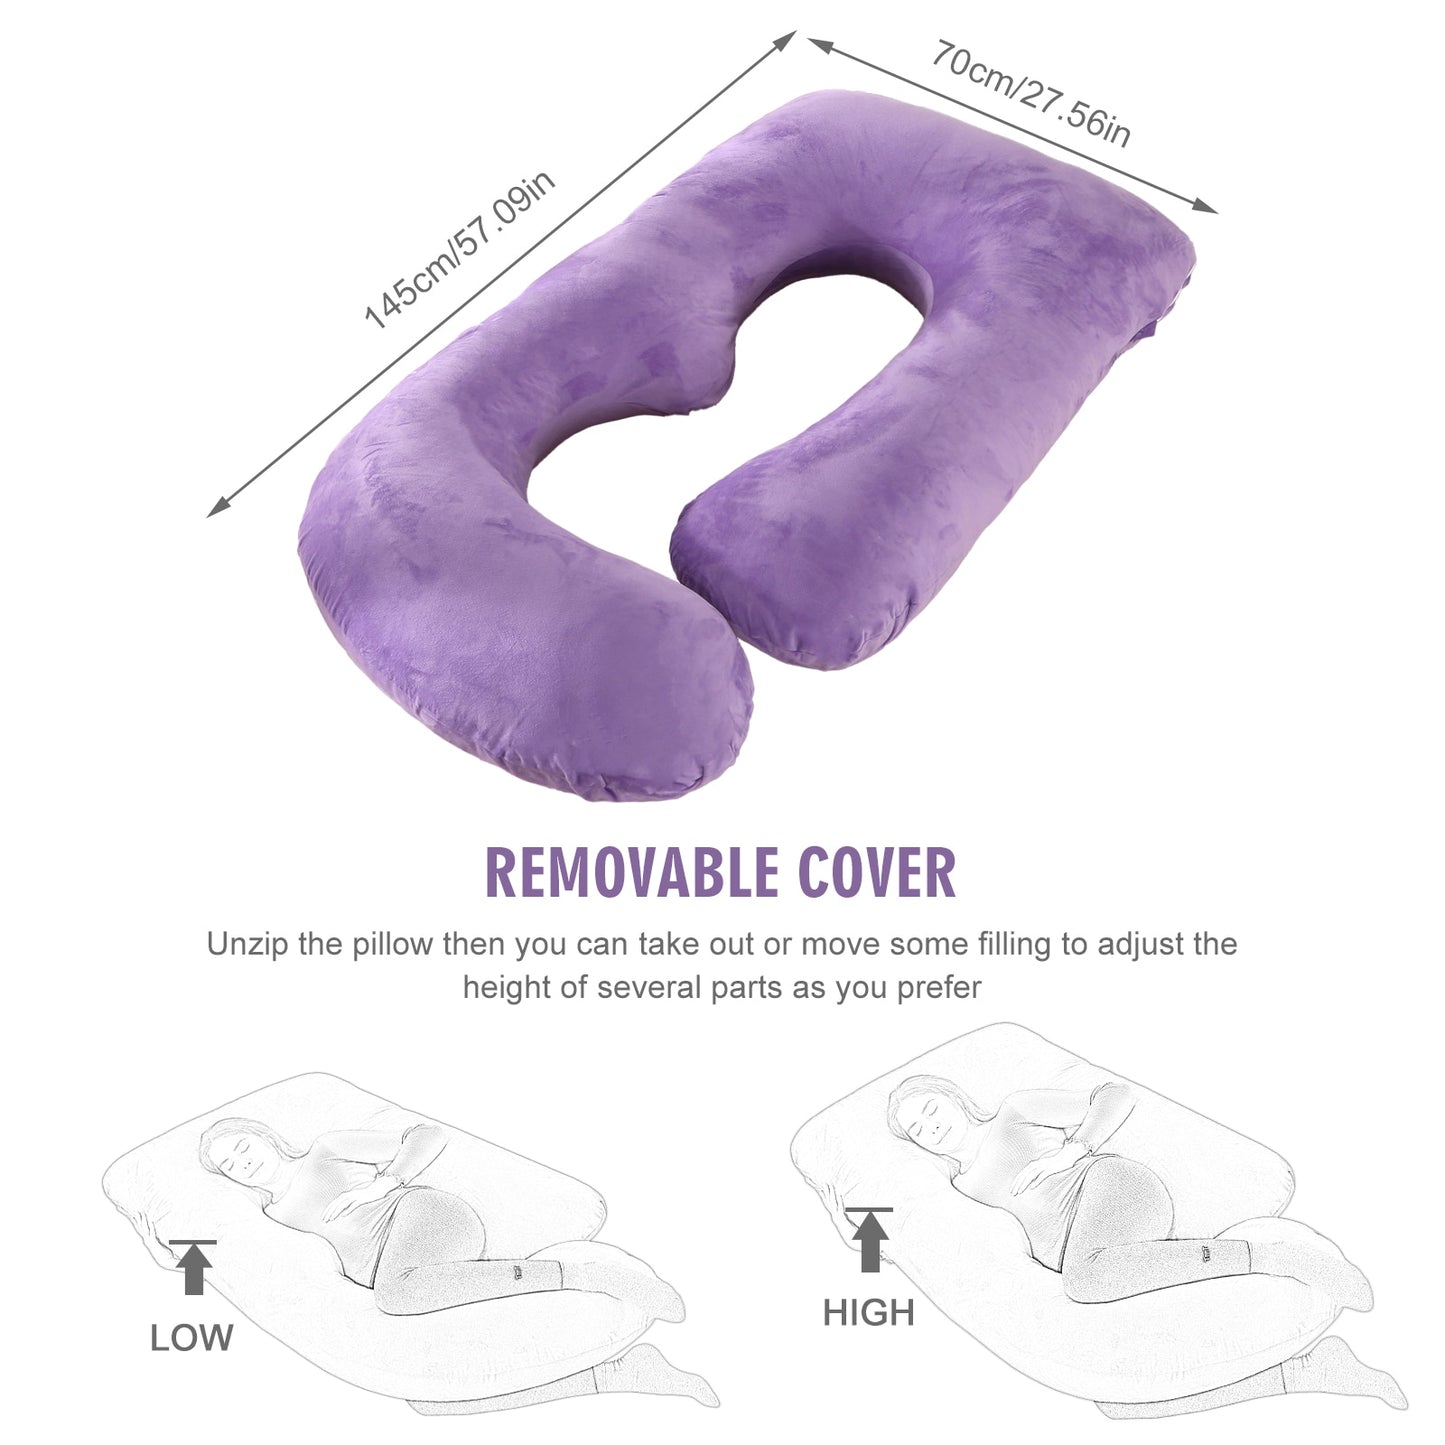 Extra Wide Pregnancy Support Pillow